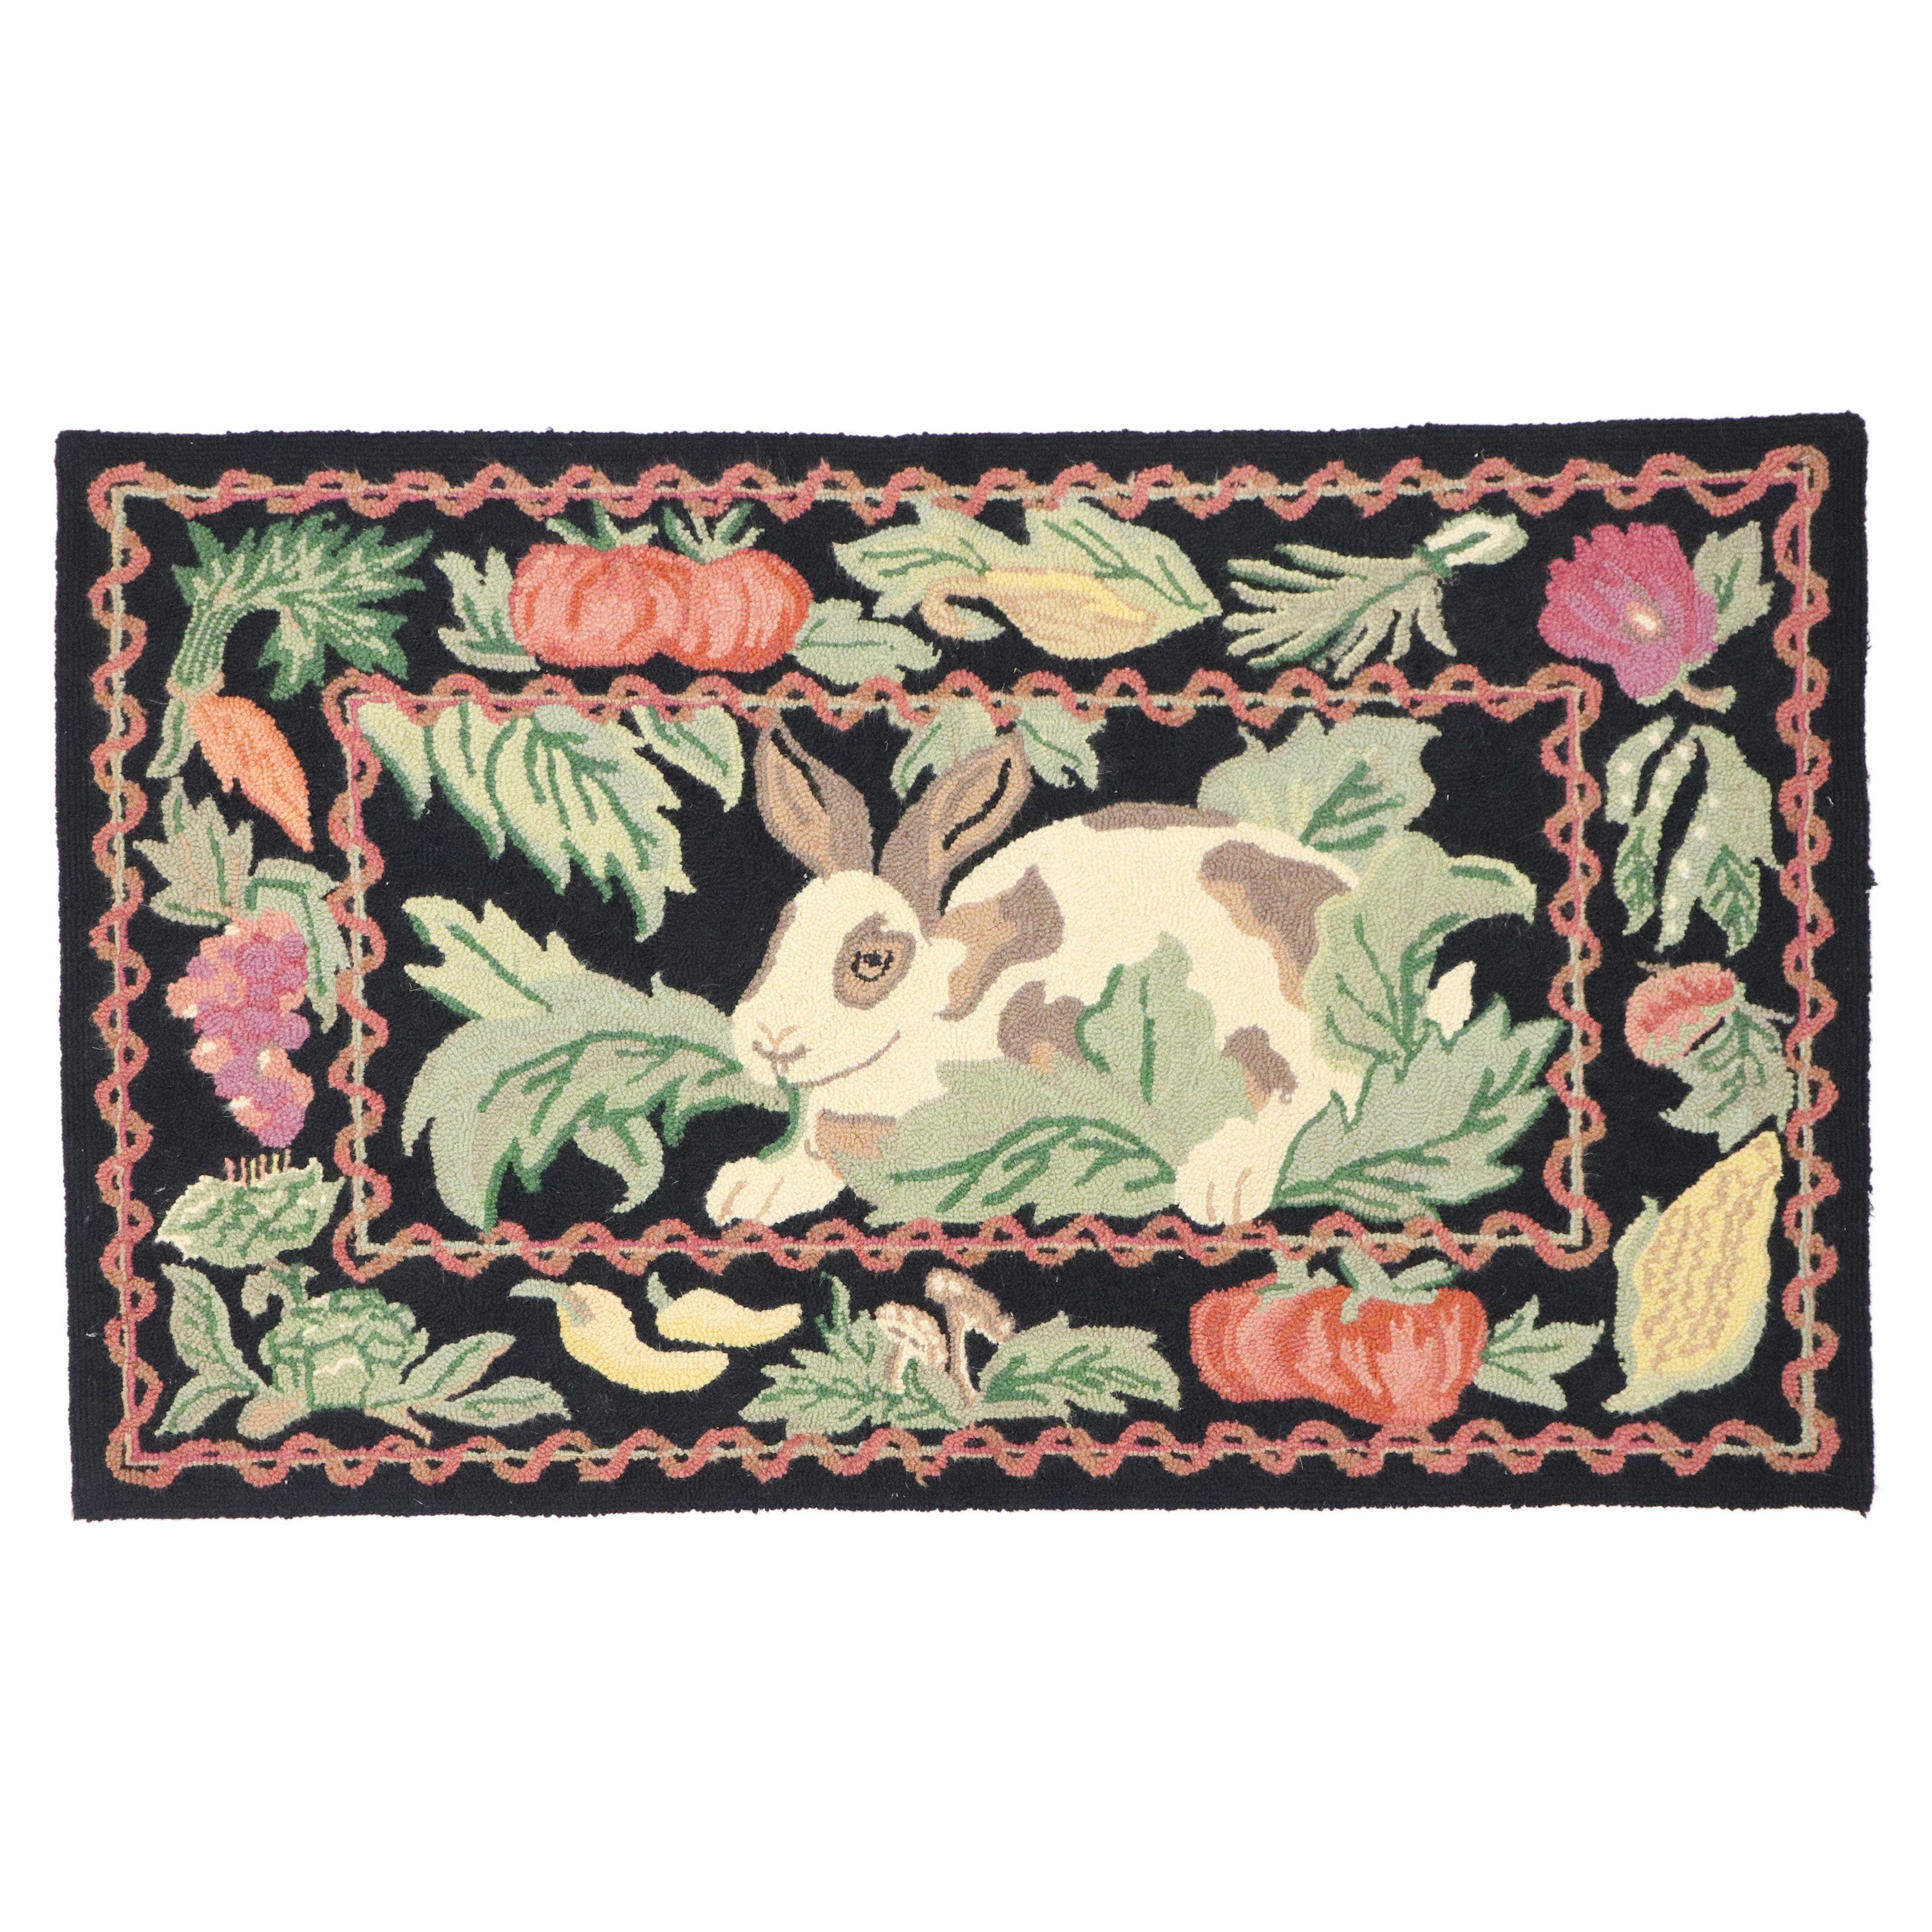 Vintage Garden Rabbit Hooked Rug with French Country Cottage Style For Sale